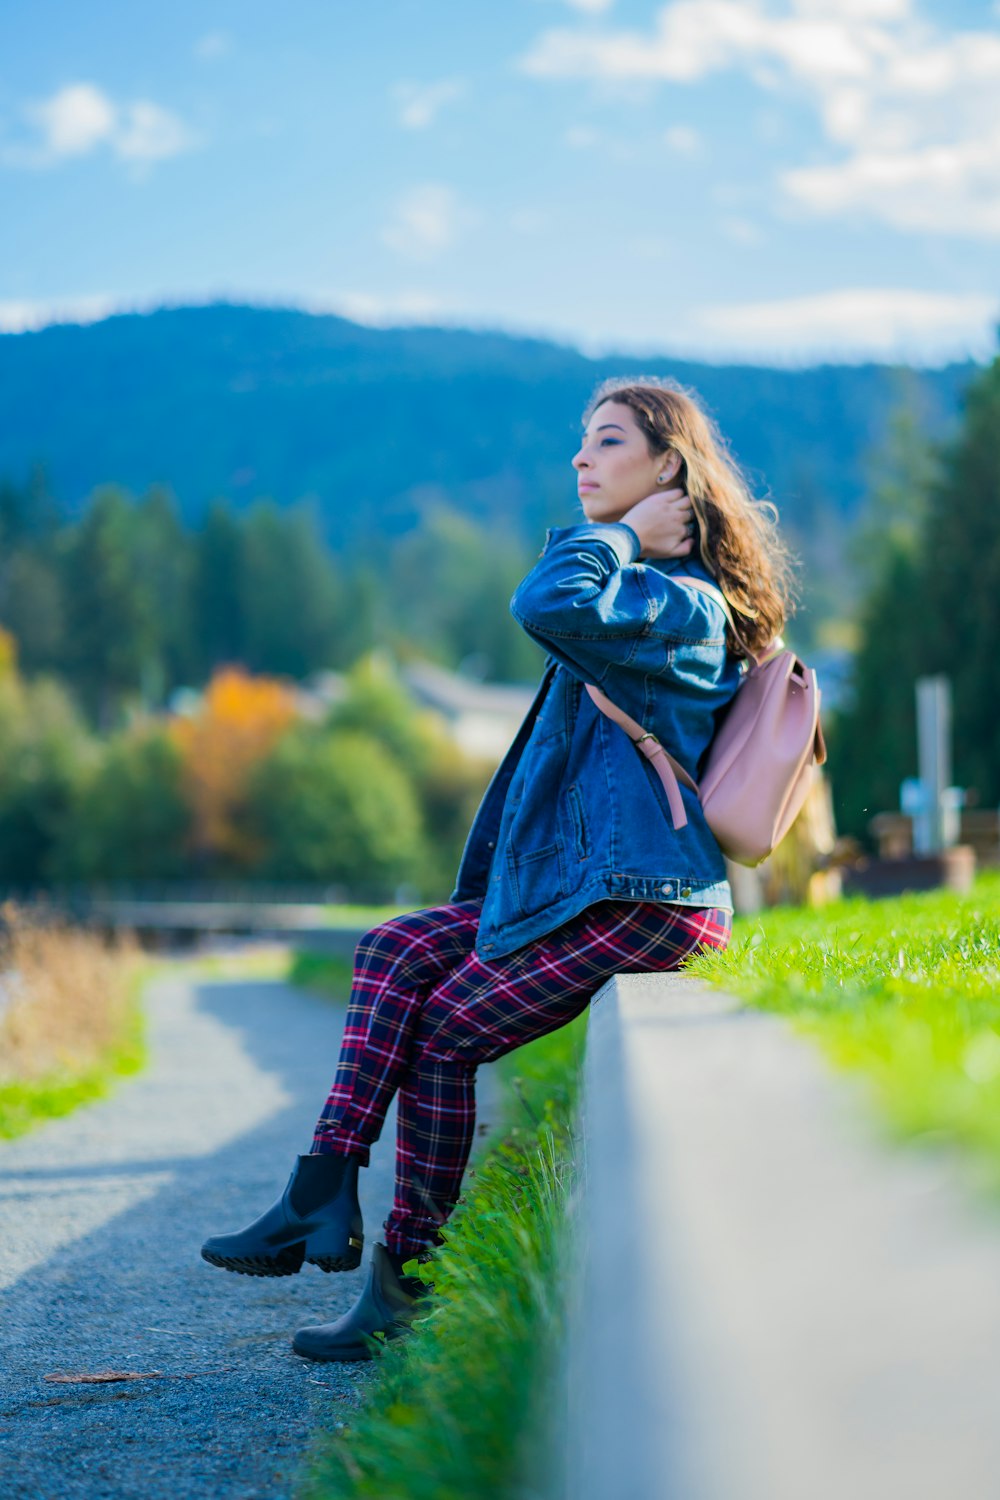 woman in blue scarf and red plaid long sleeve shirt standing on road during daytime